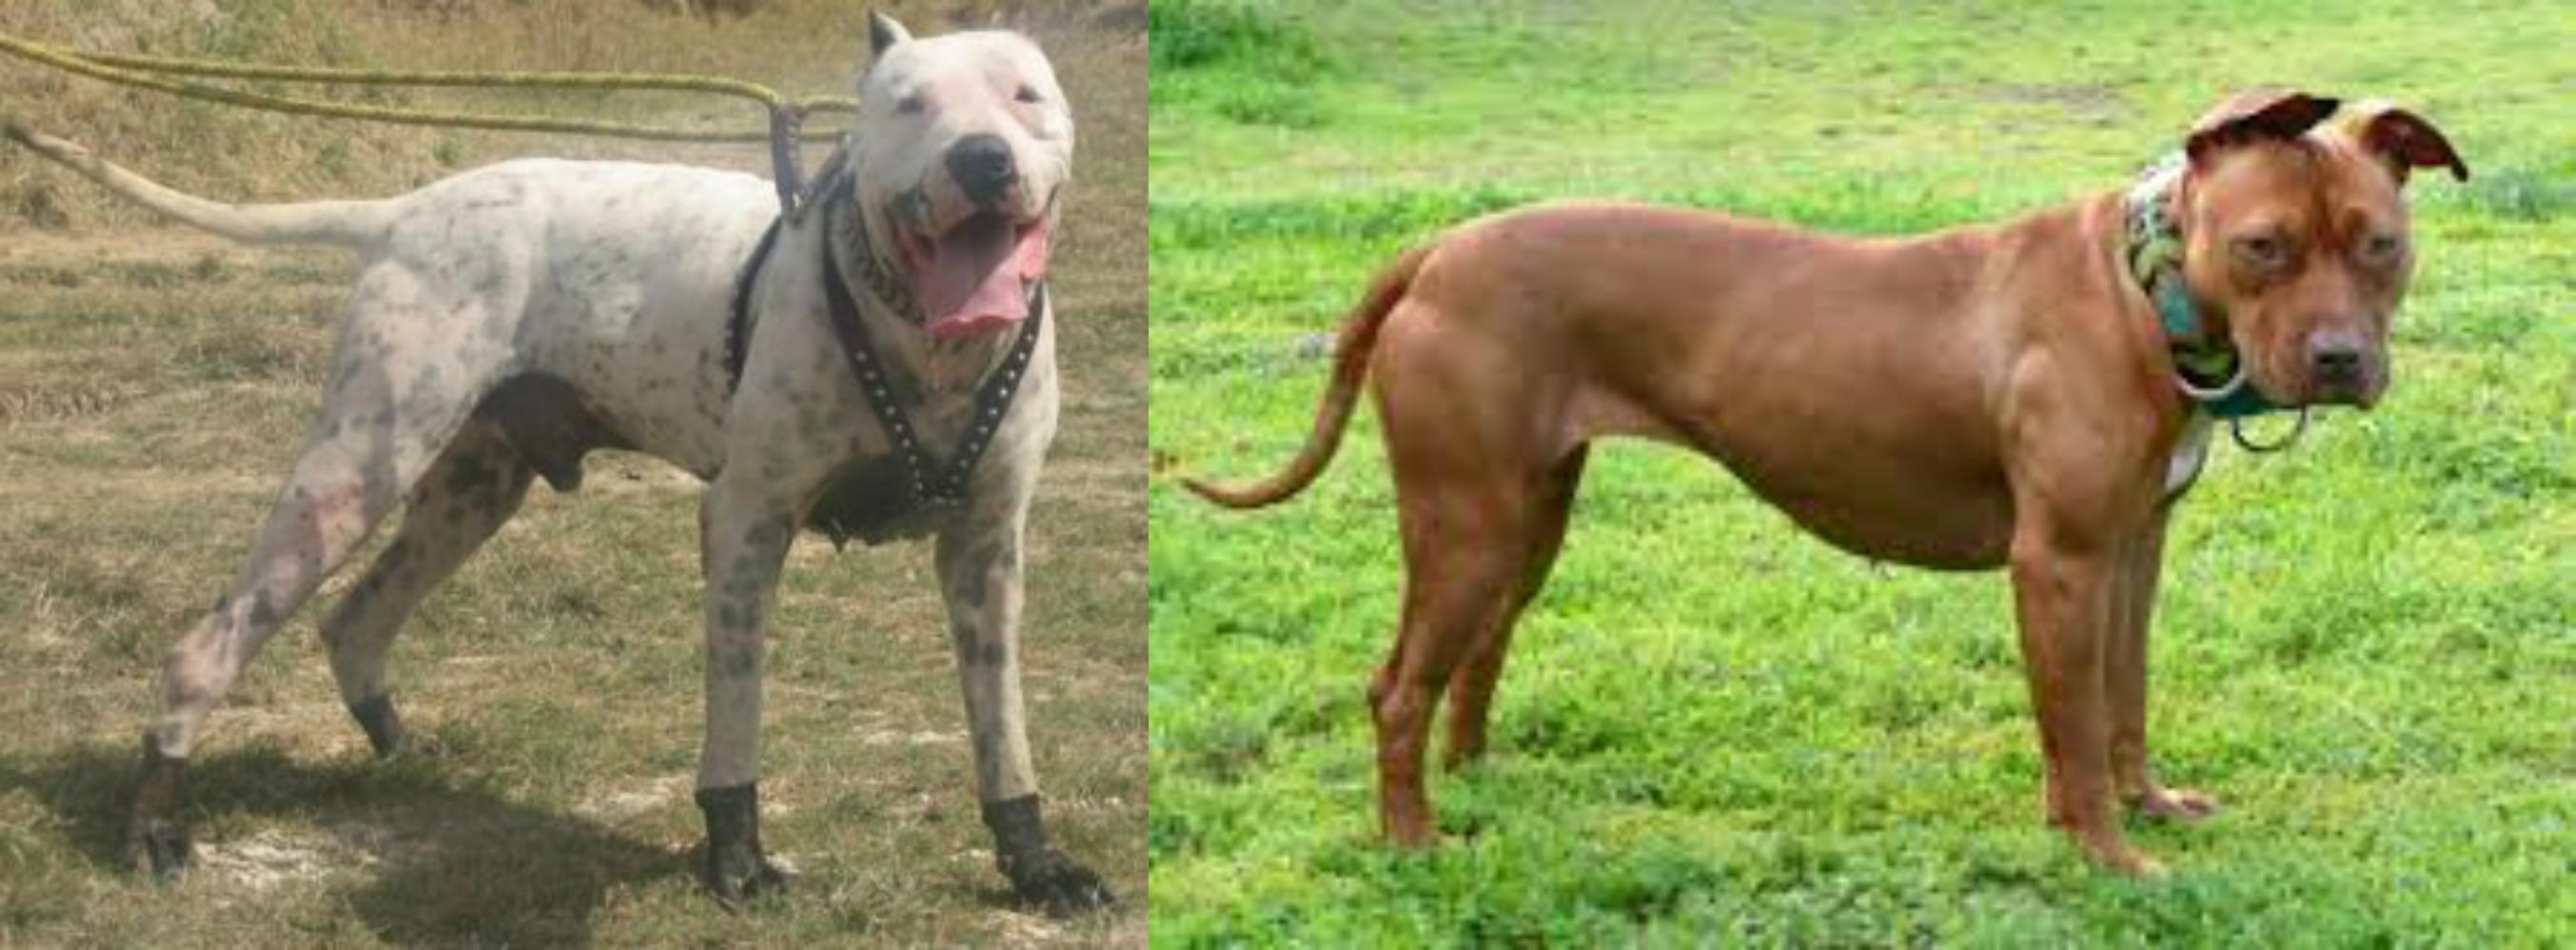 Gull Dong Vs American Pit Bull Terrier Breed Comparison